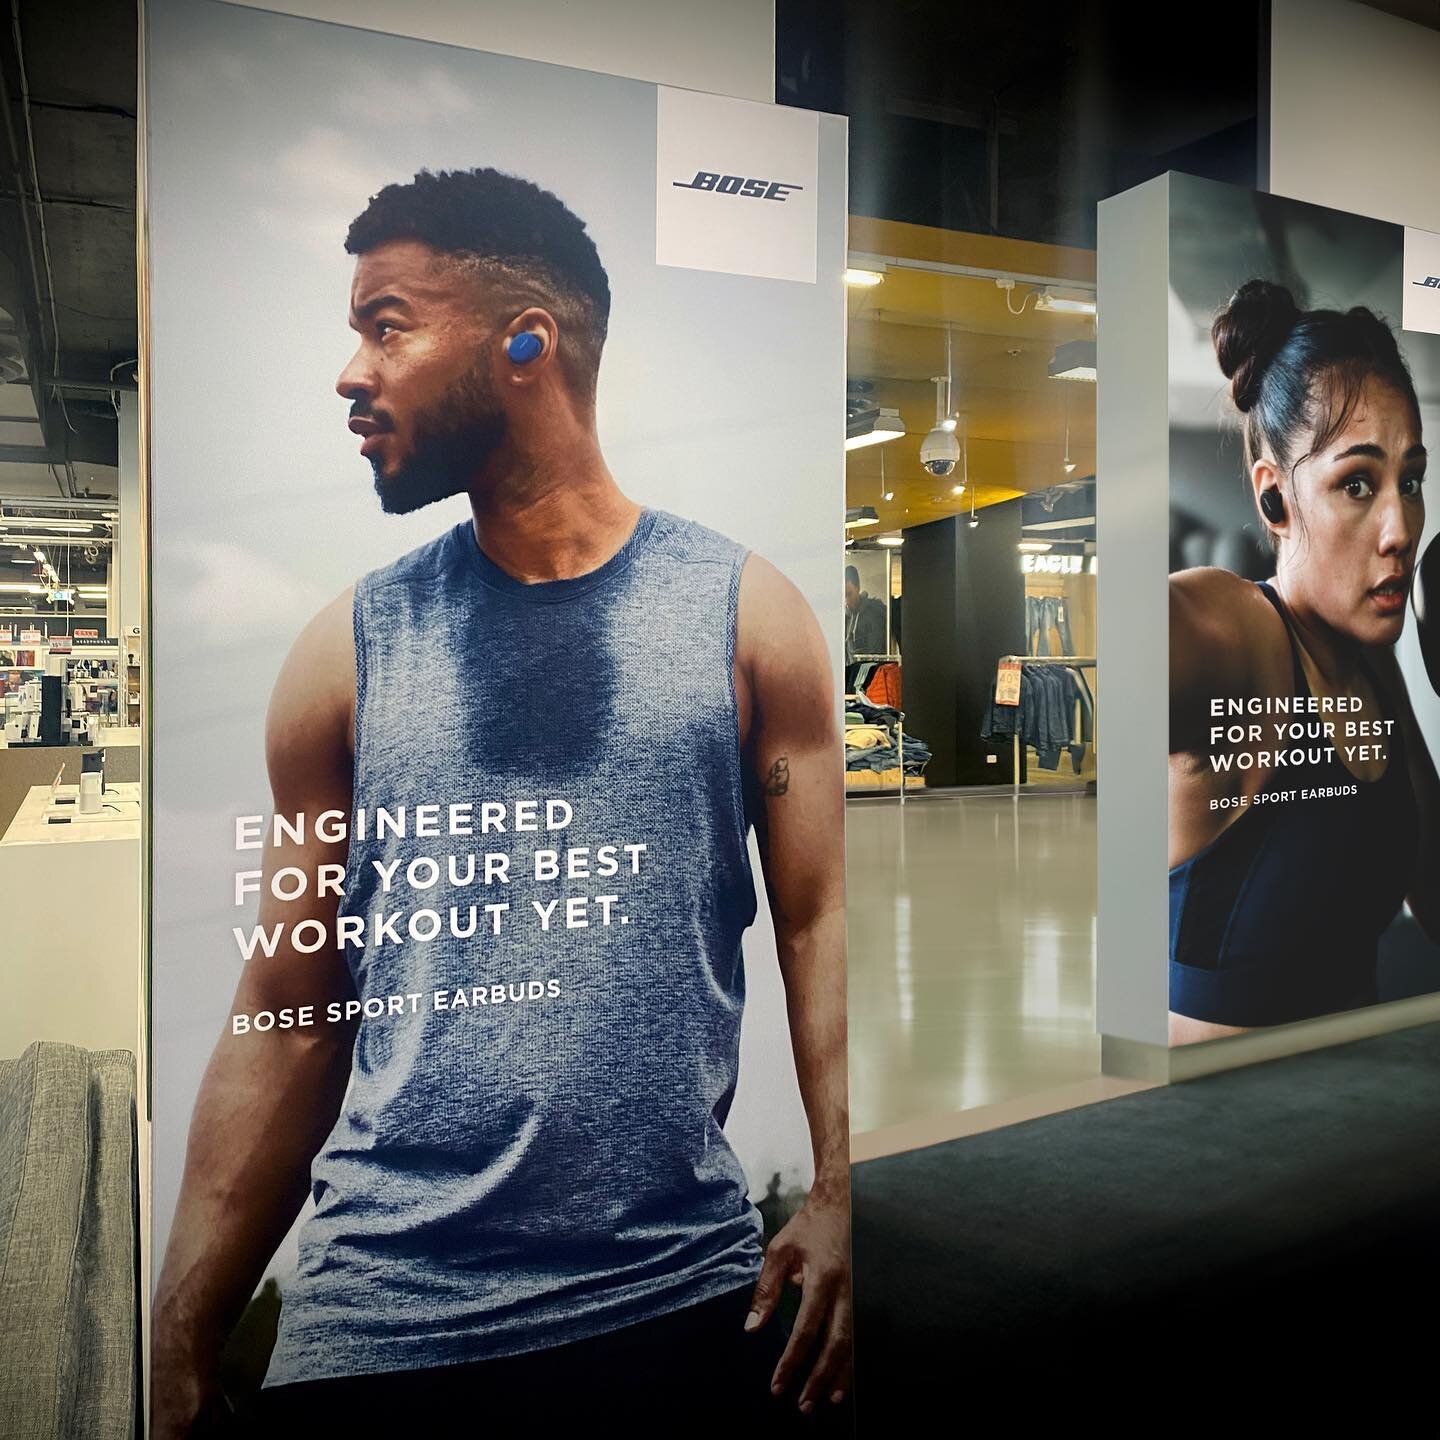 Nice to see our BOSE retail work out and about. Photography by the talented Michael Corridore.
.
.
.
#work #photography #retail #creative #production #campaigns #pointofsale